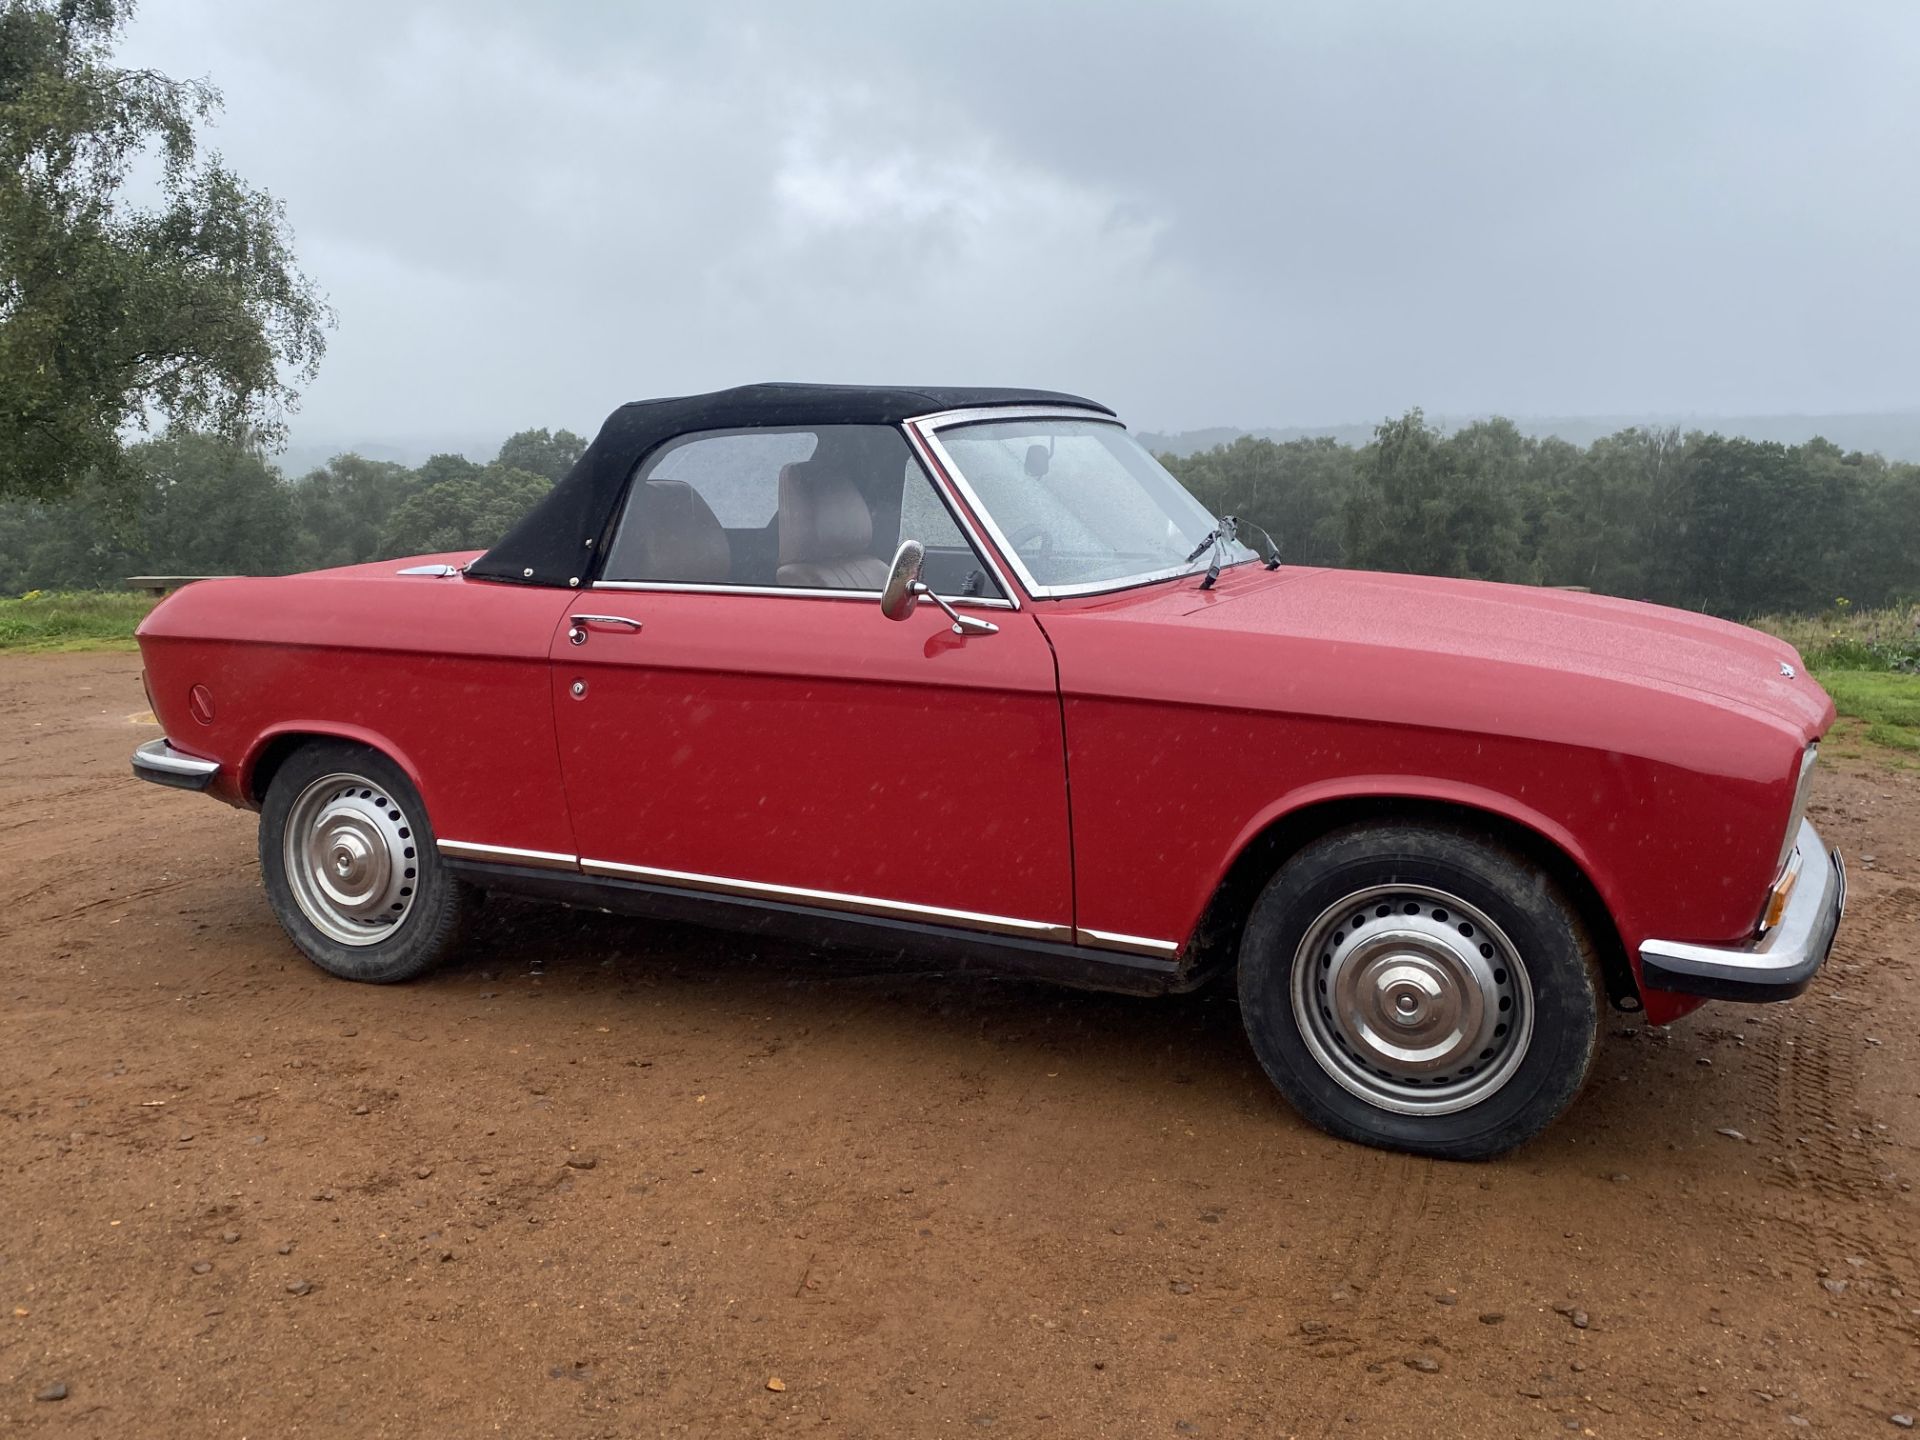 Peugeot 304 Convertible. Registration number: TPA 315M. Rare RHD drive model with 82,696 miles from - Image 8 of 14